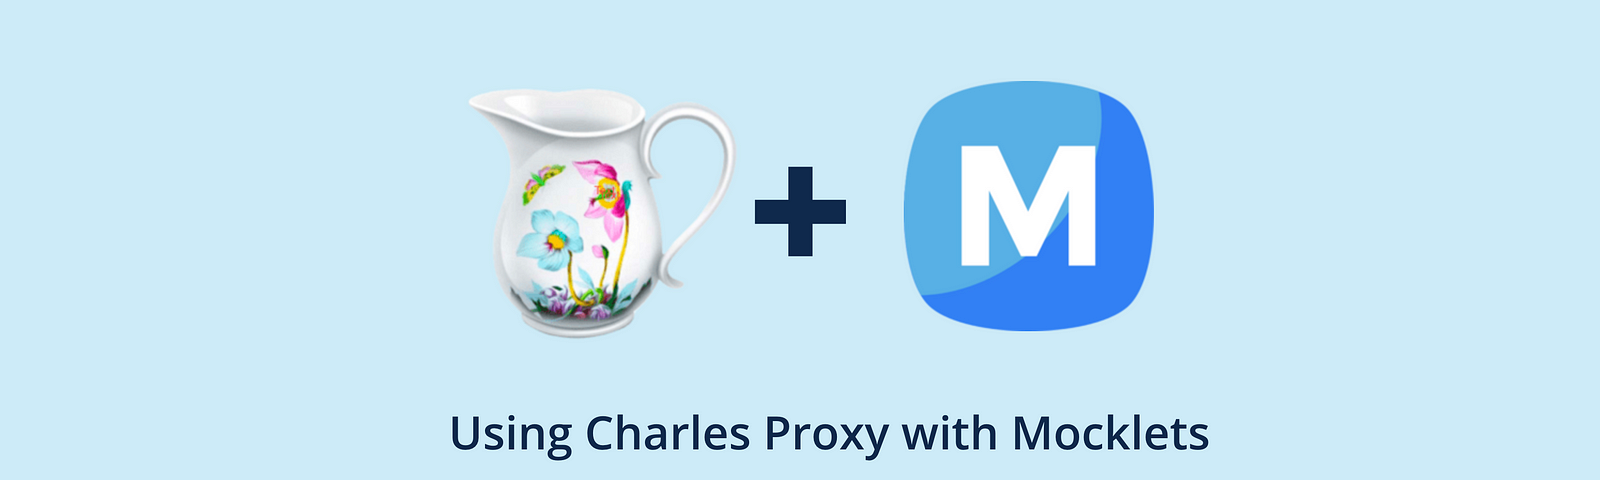 Using Charles Proxy with Mocklets